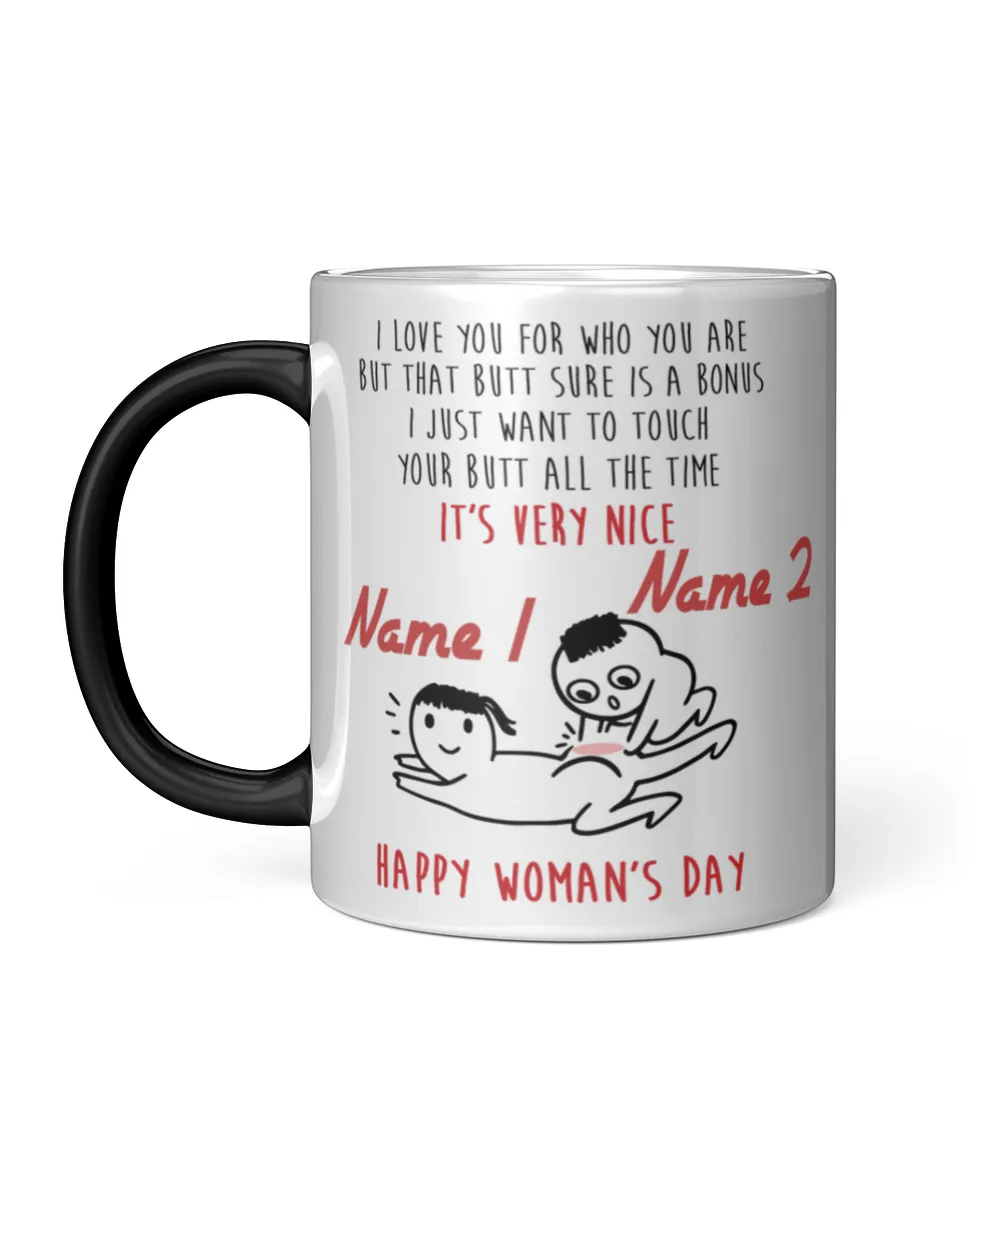 Funny Couple - Gift for Woman's Day